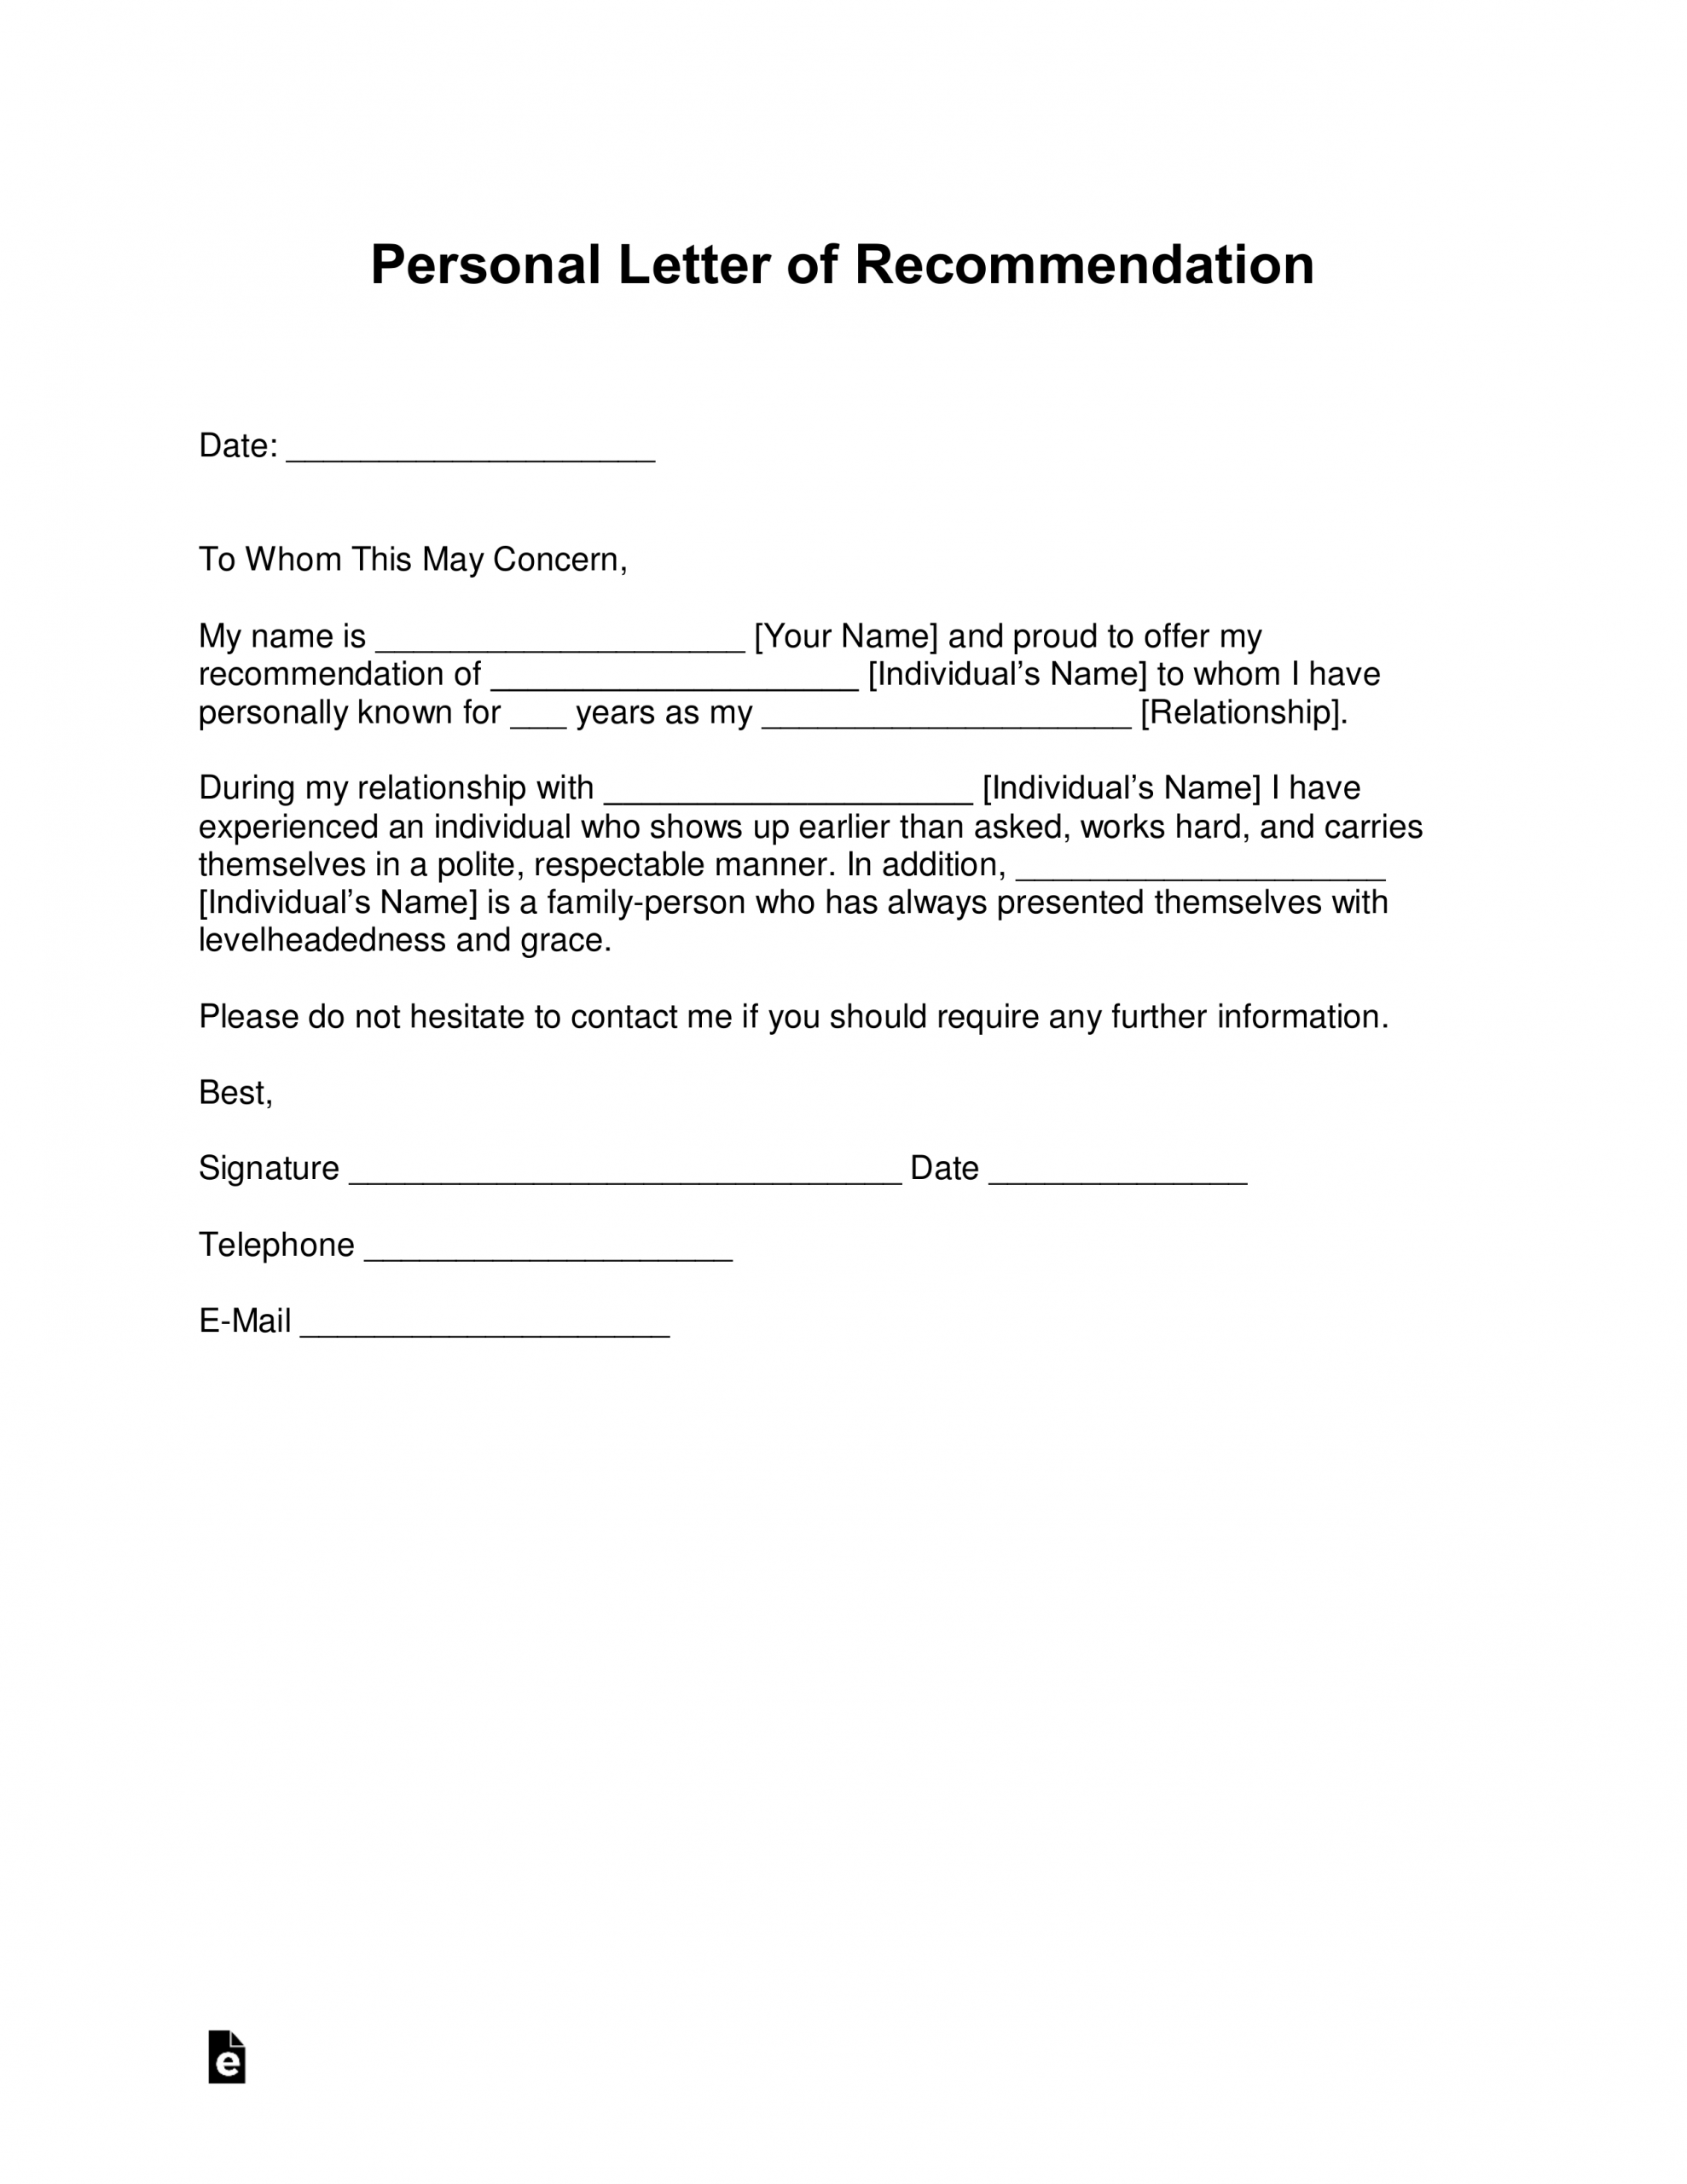 Free Personal Letter Of Recommendation Template For A inside dimensions 2550 X 3301